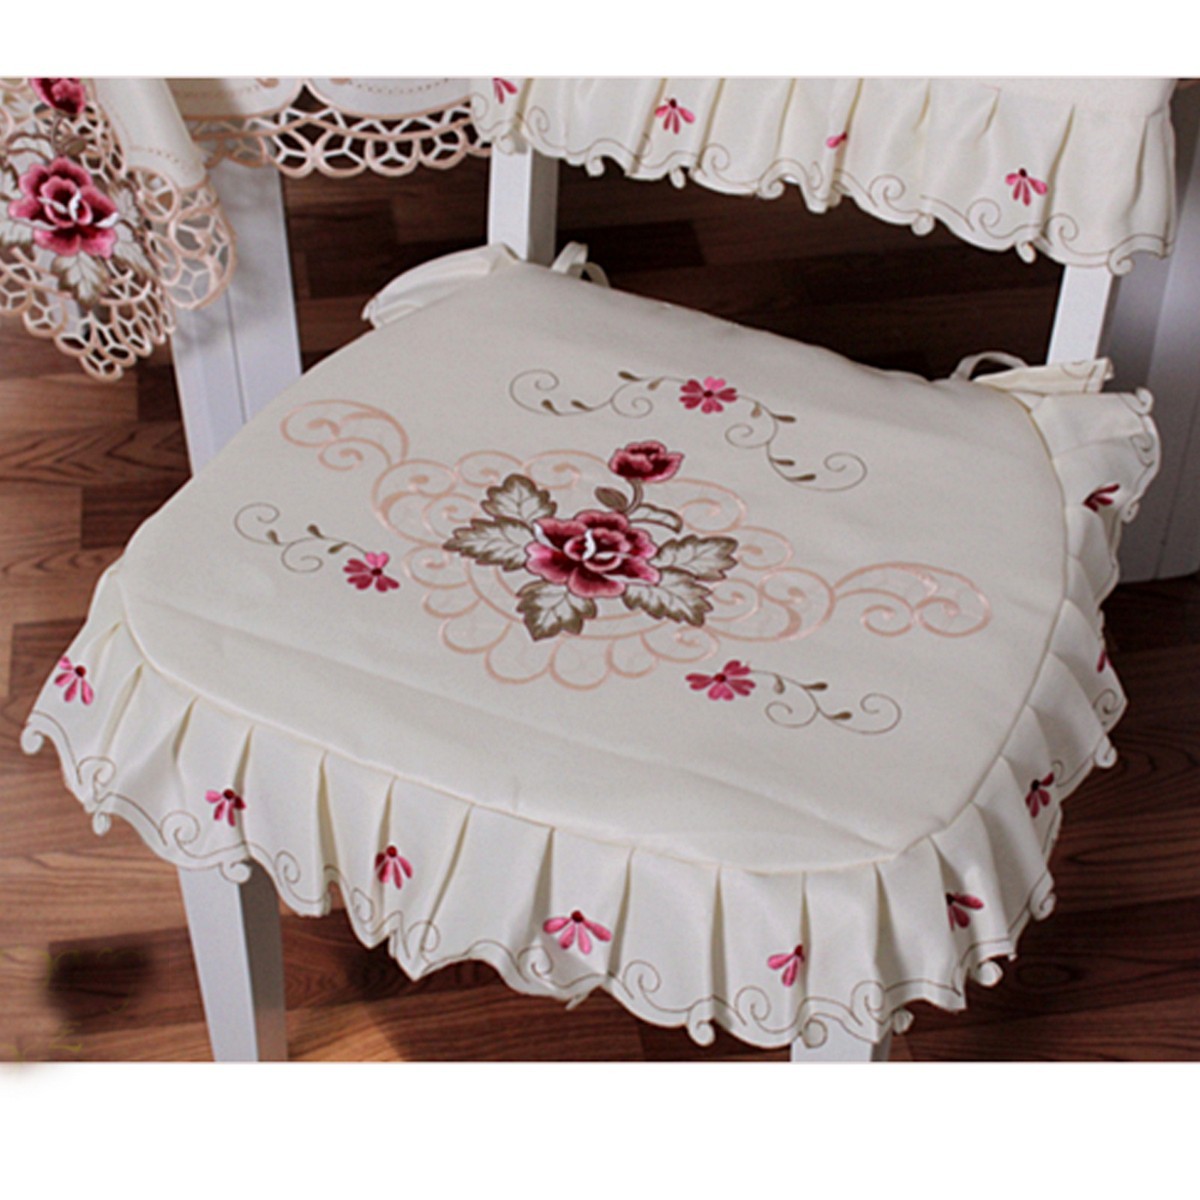 Vintage Flower Embroidered Tie-on Seat Cushion Ruffle Pad Dining Chair